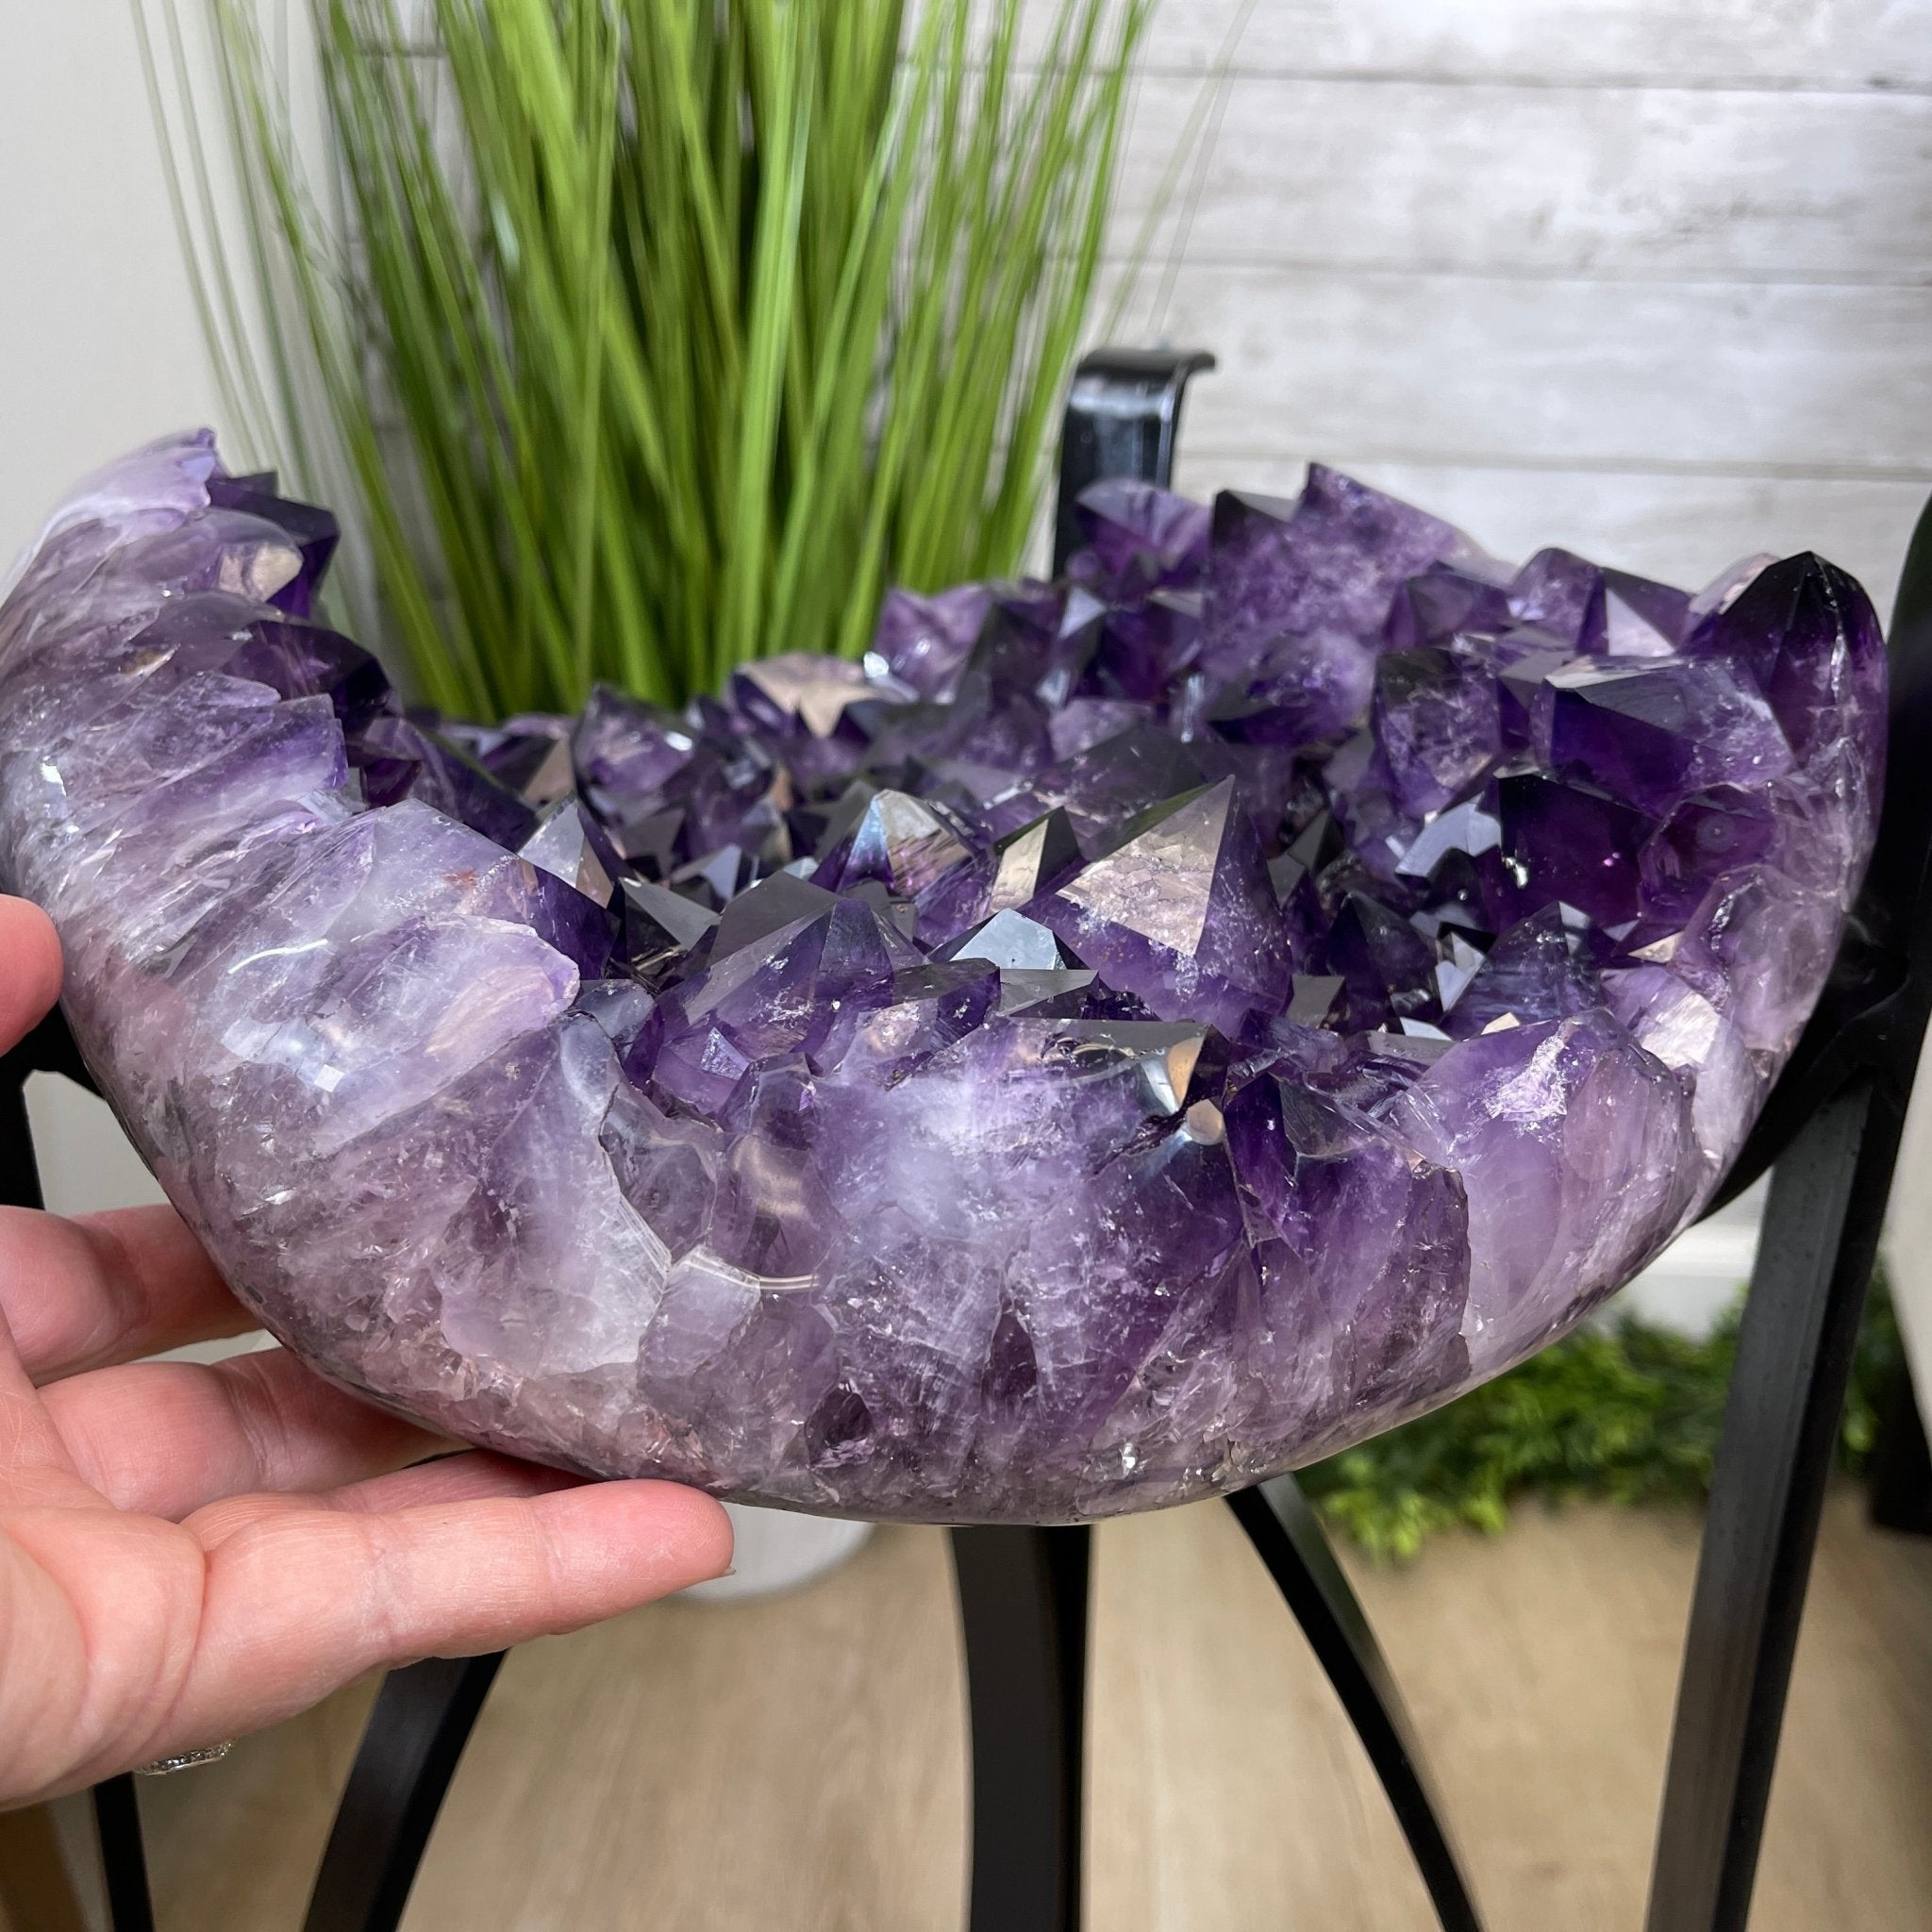 Super Quality Brazilian Amethyst Geode Side Table, 41.1 lbs, 23.75" tall on a metal base #1384-0029 by Brazil Gems - Brazil GemsBrazil GemsSuper Quality Brazilian Amethyst Geode Side Table, 41.1 lbs, 23.75" tall on a metal base #1384-0029 by Brazil GemsTables: Side1384-0029